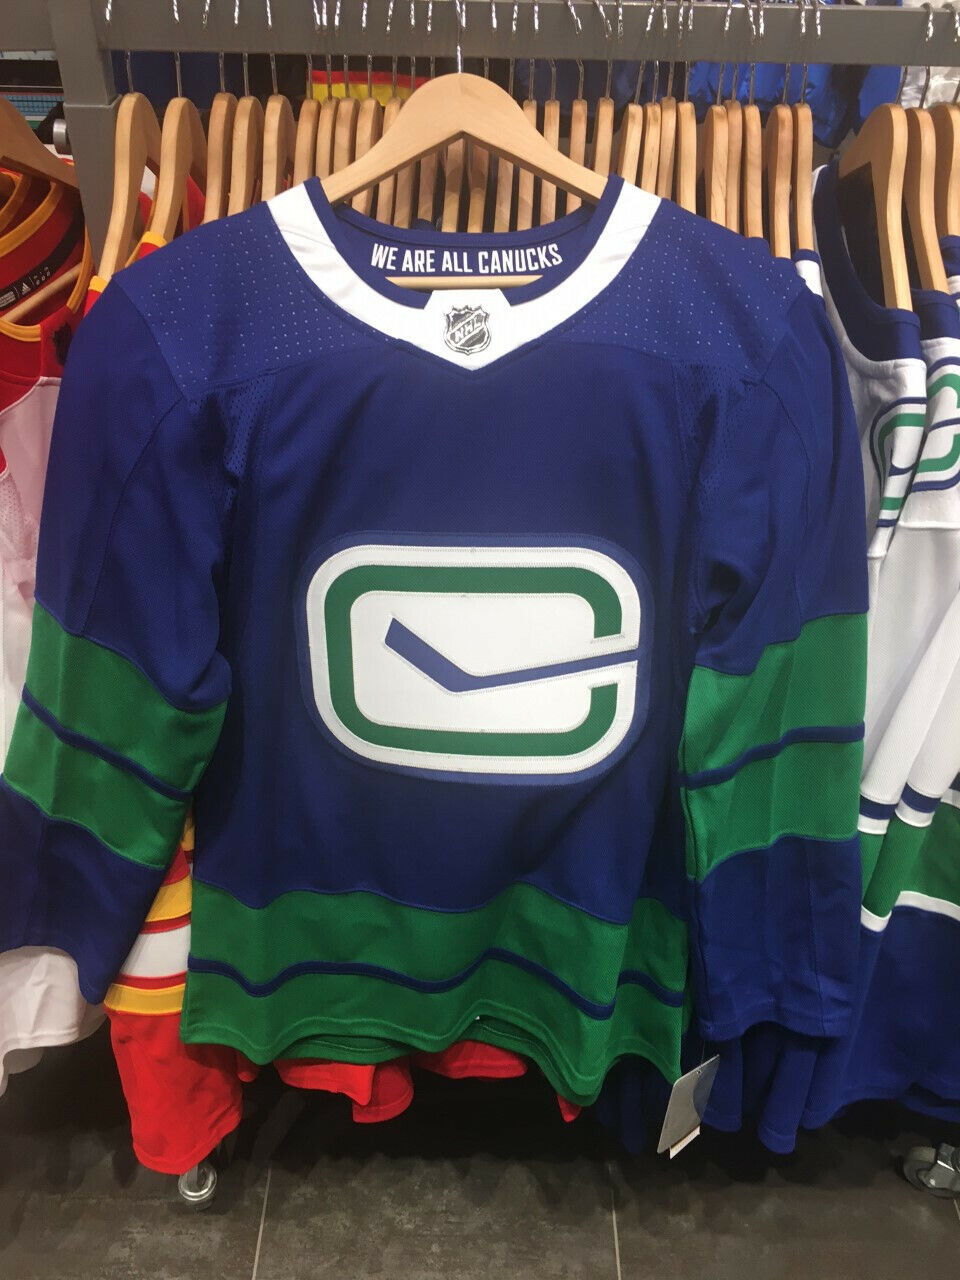 Free shipping on posting reviews Vancouver Canucks 3rd Adidas Overseas parallel import regular item Jersey Size 50 tags it Medium